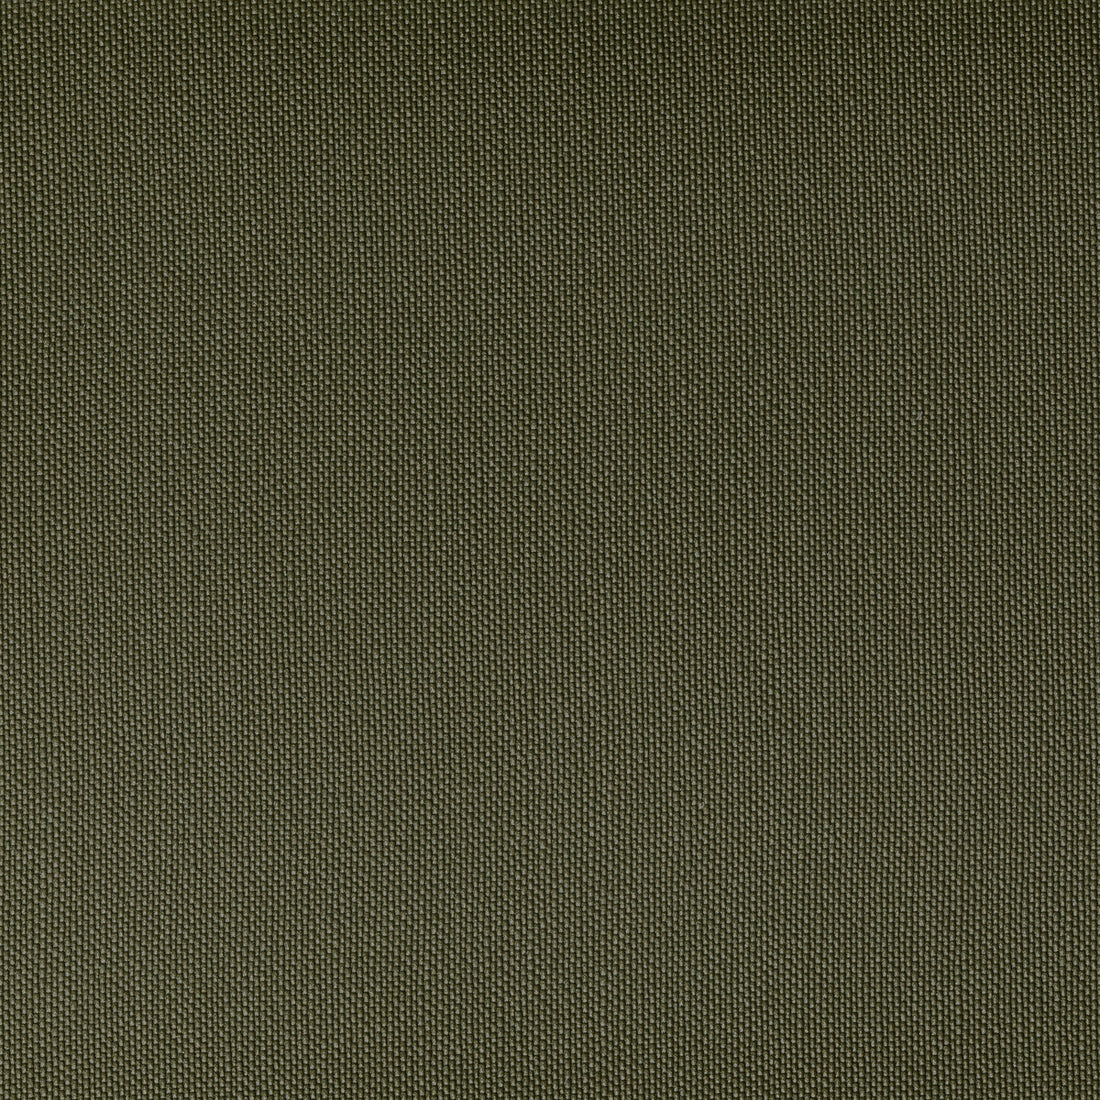 Ventura fabric in cactus color - pattern VENTURA.3.0 - by Kravet Contract in the Foundations / Value collection